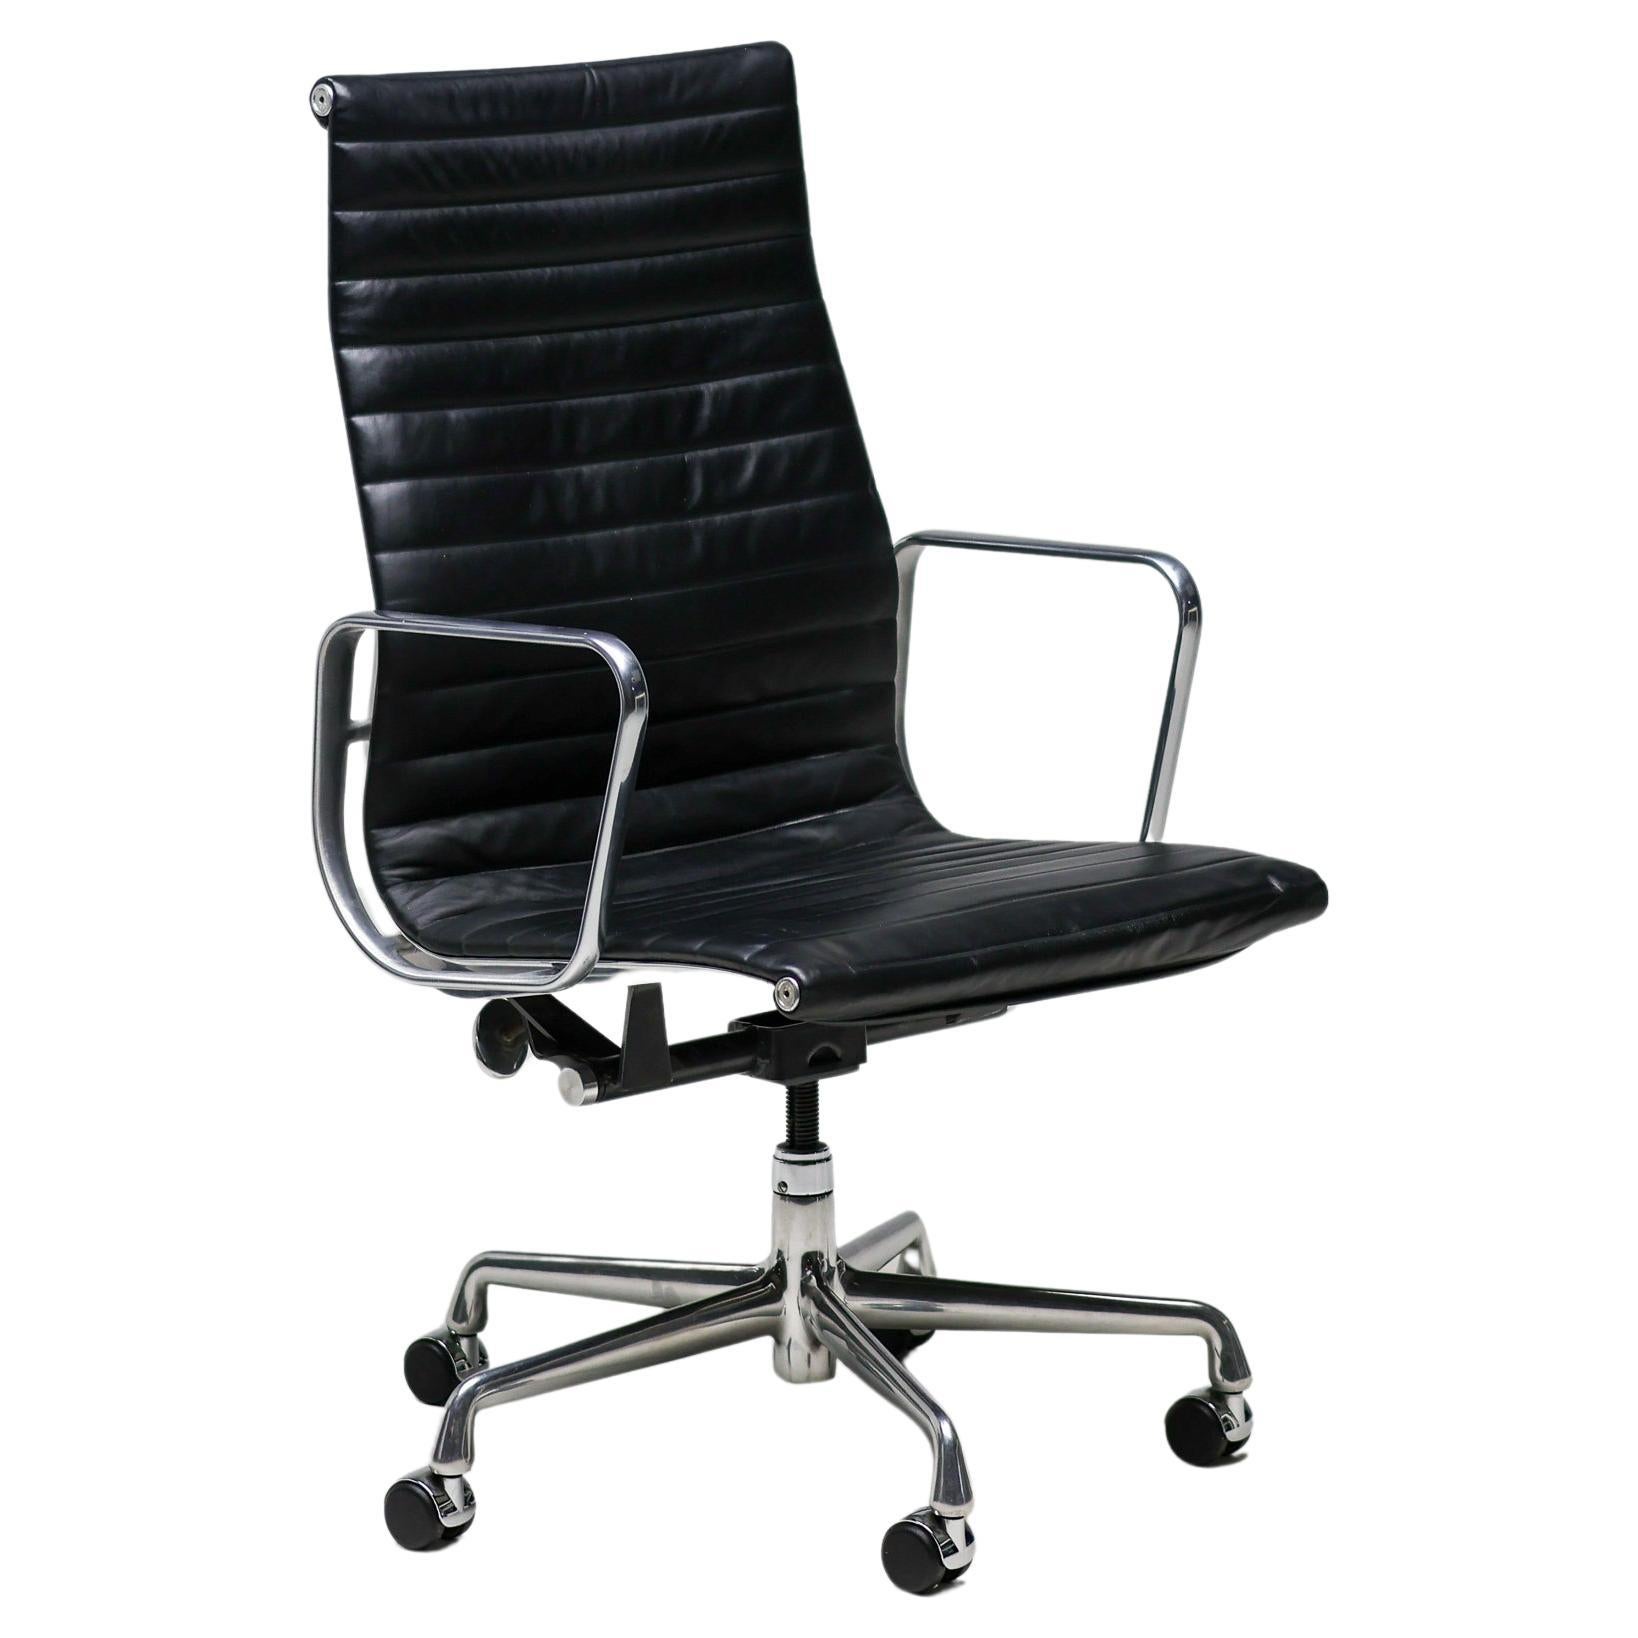 Charles and Ray Eames EA119 Black Leather Executive Desk Chair by Herman Miller (en anglais)